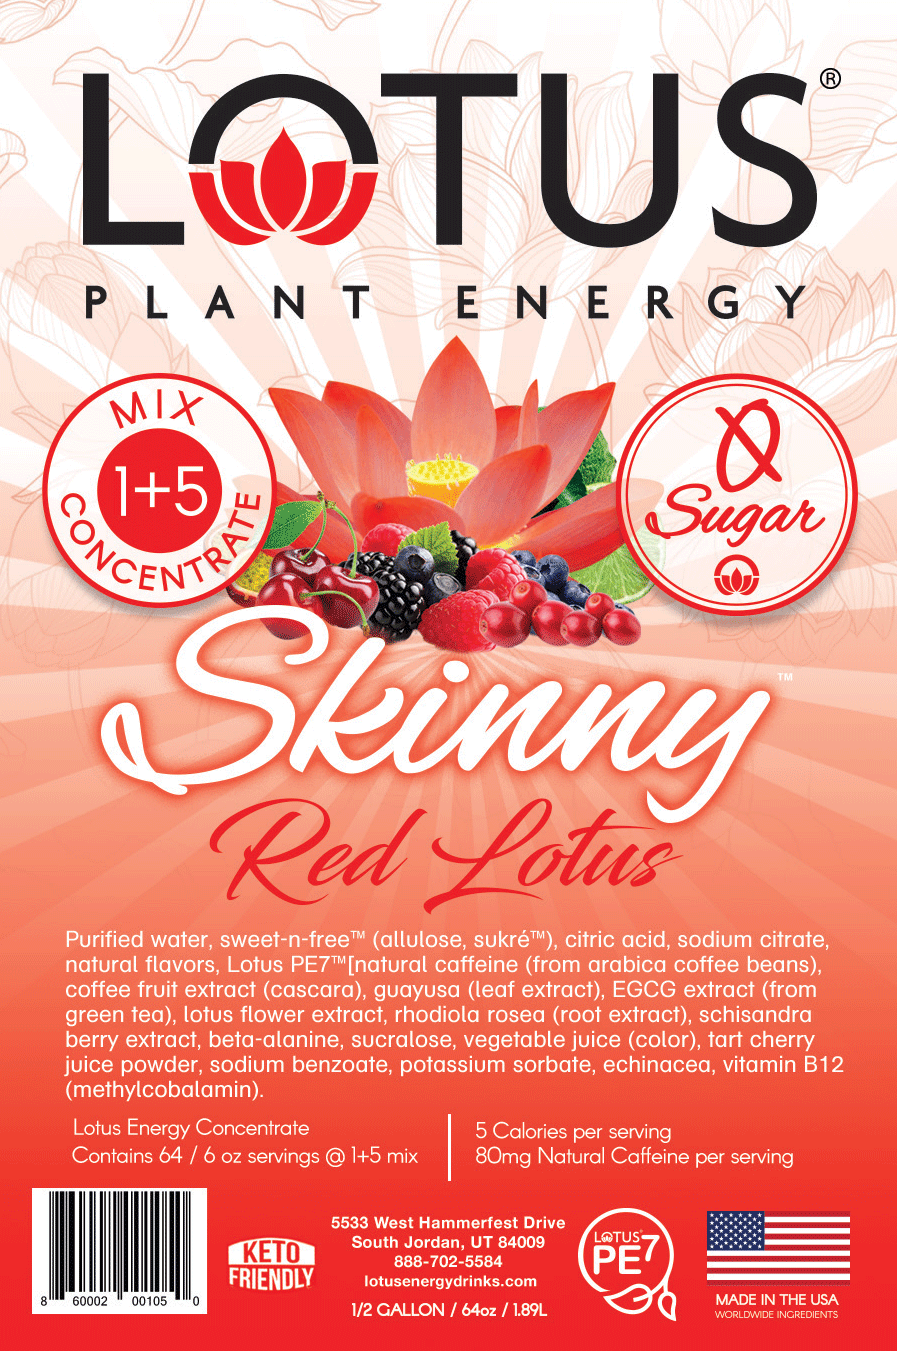 Skinny Red Lotus Energy Concentrate